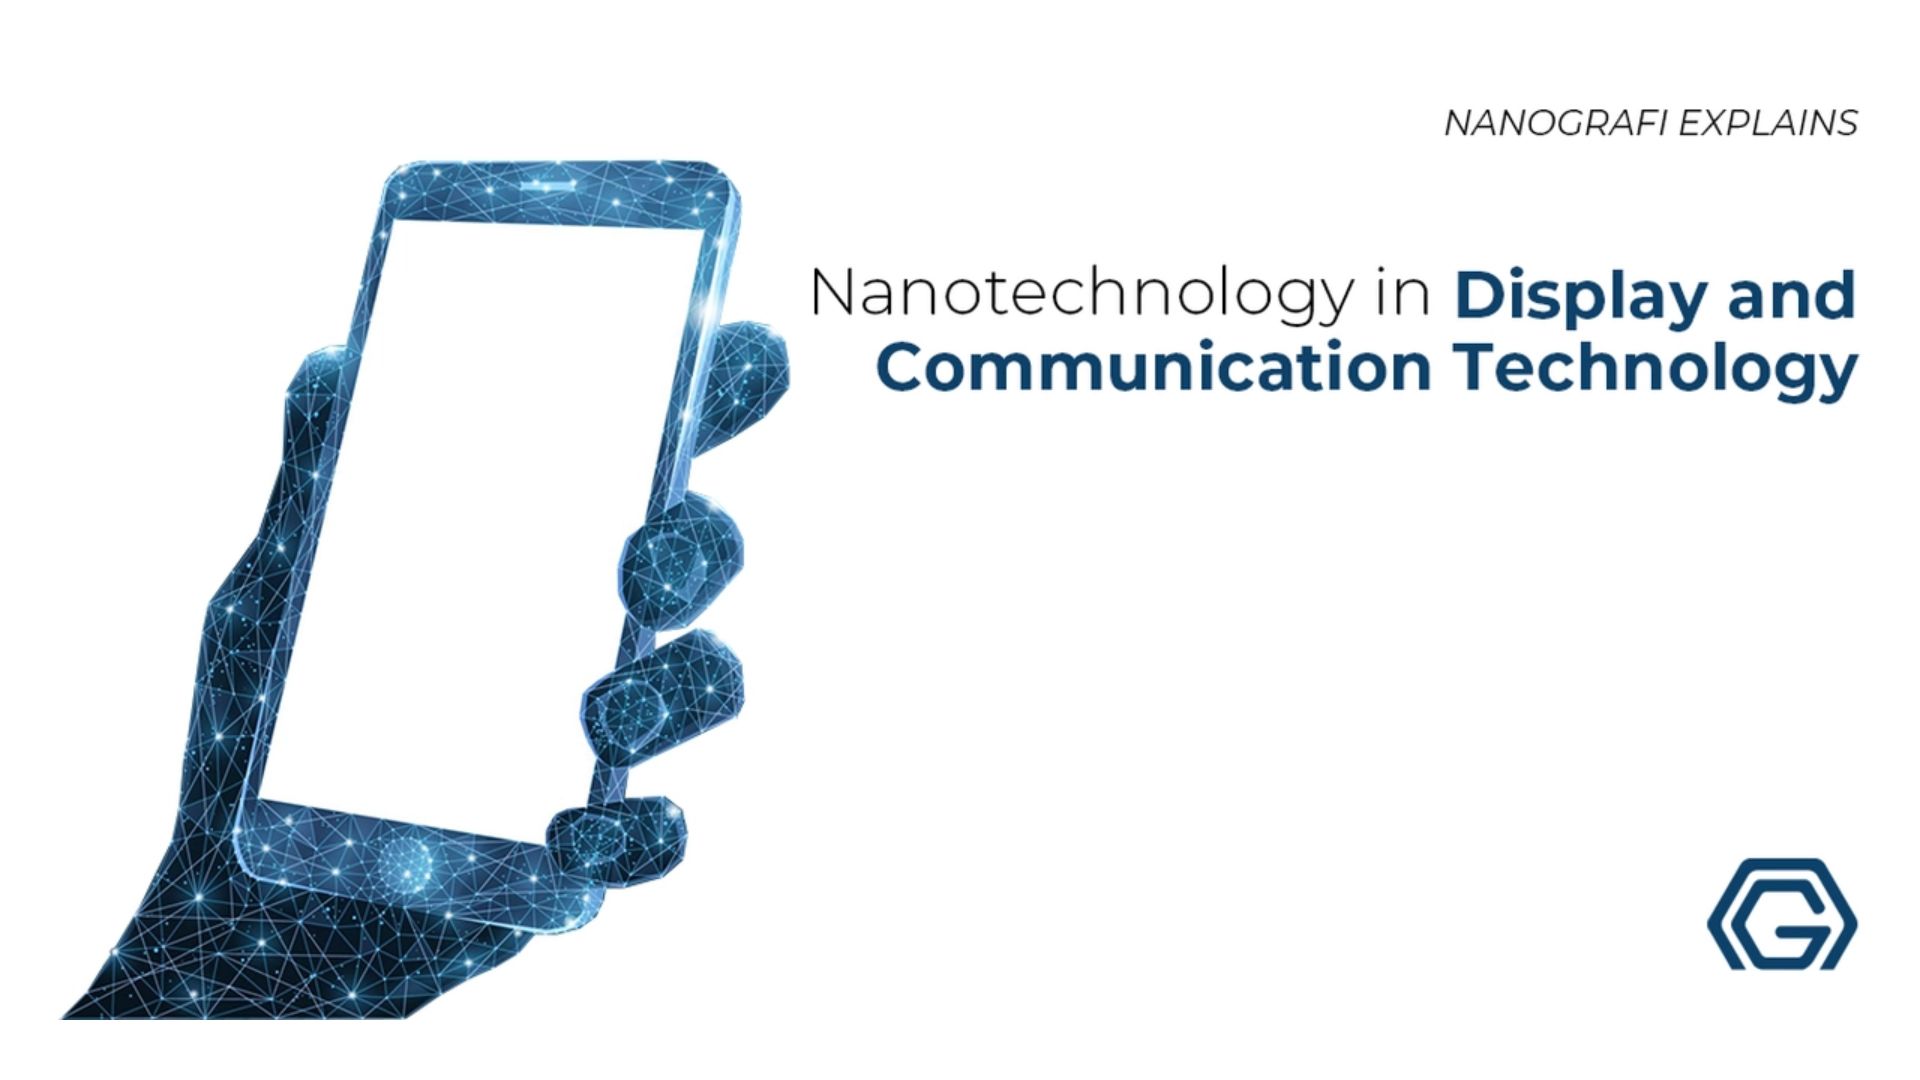 Application areas of nanotechnology in display and communication technology